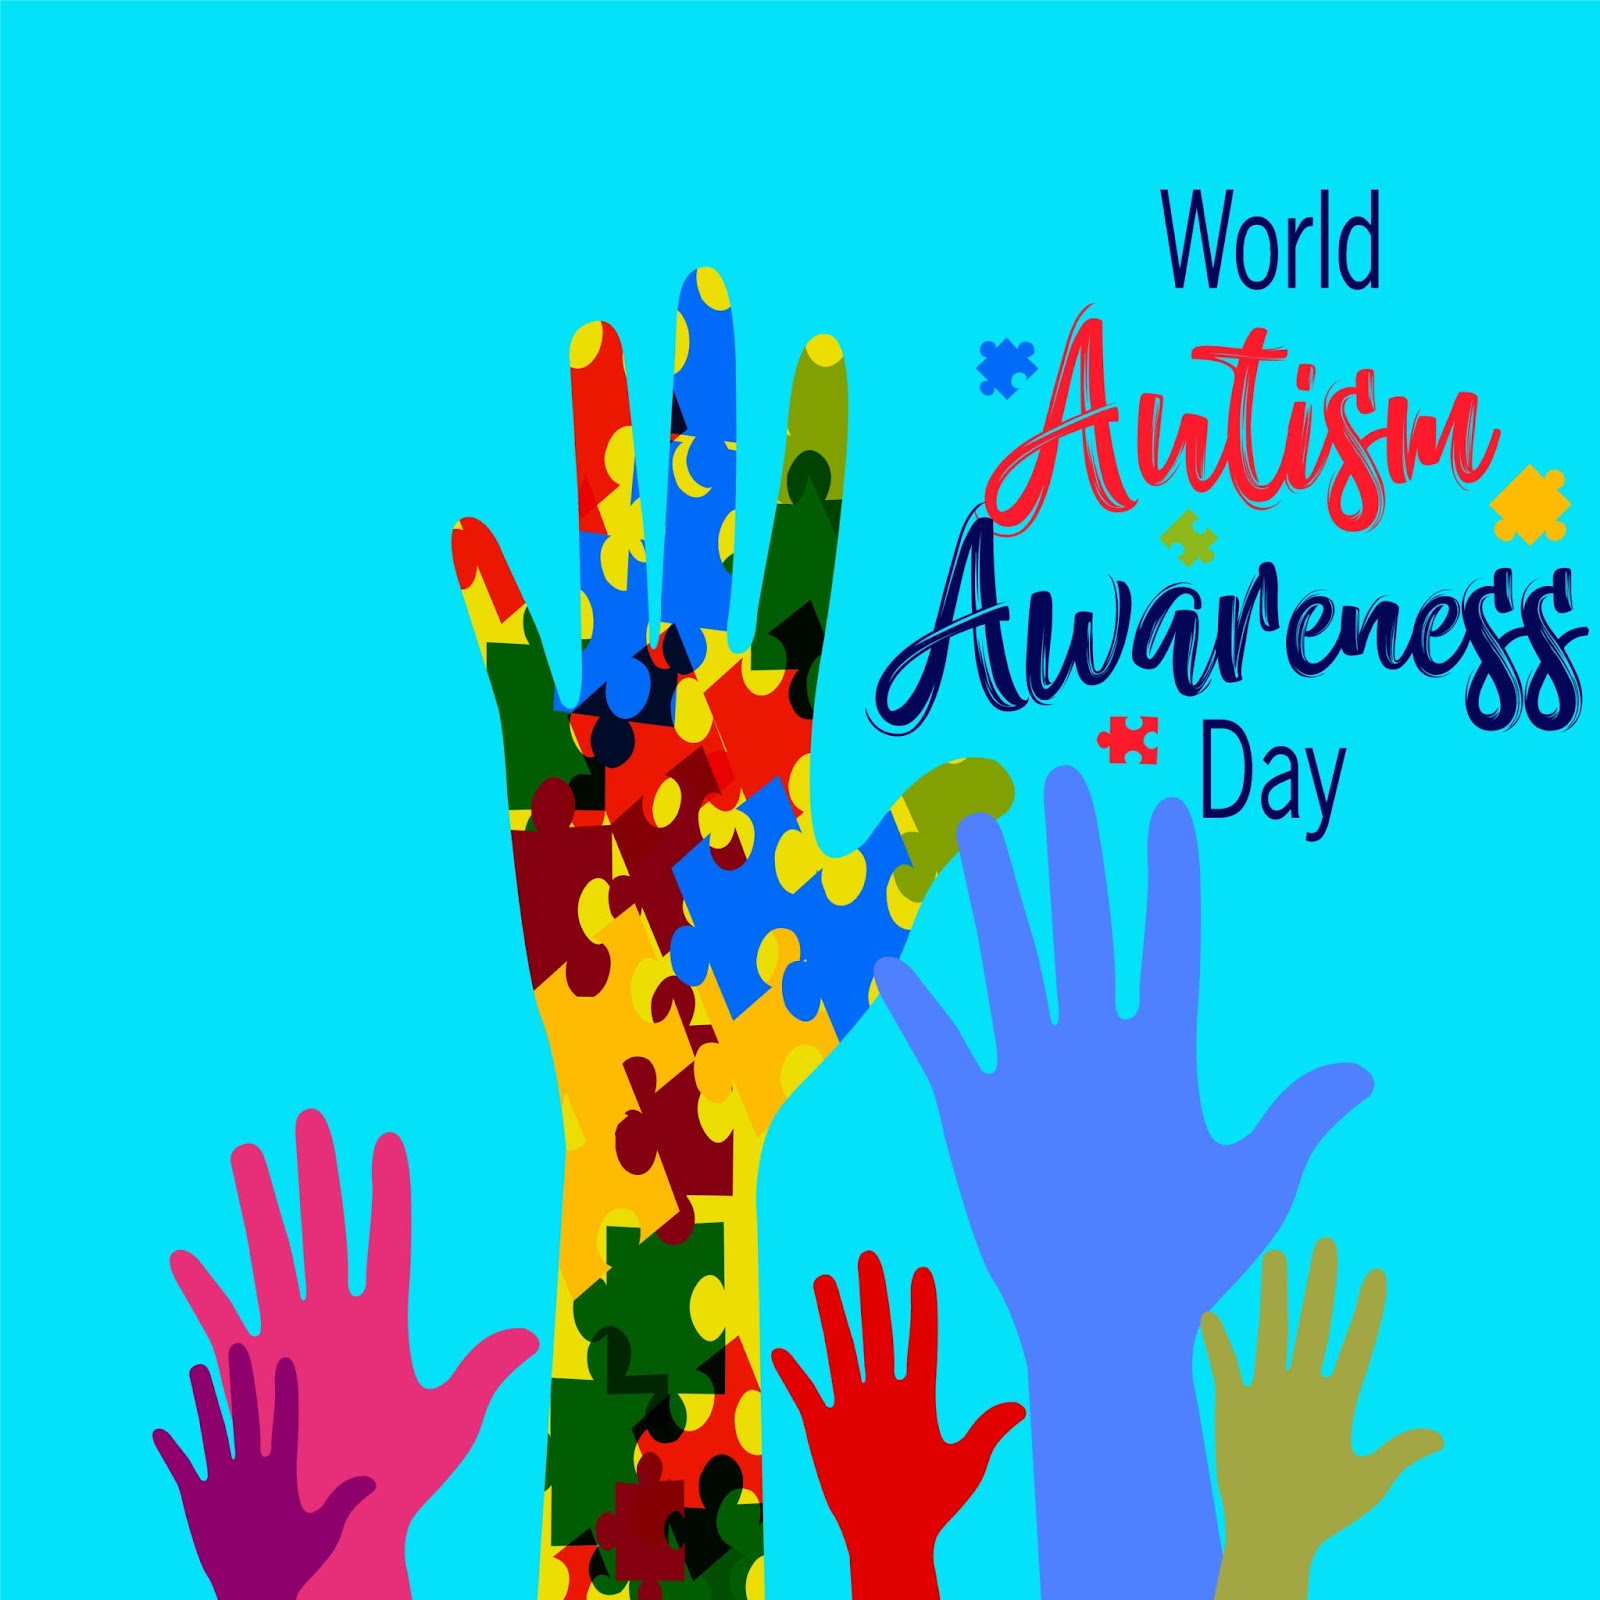 Image of colorful hands with one exhibiting colorful puzzle pieces and text of World Autism Awareness Day